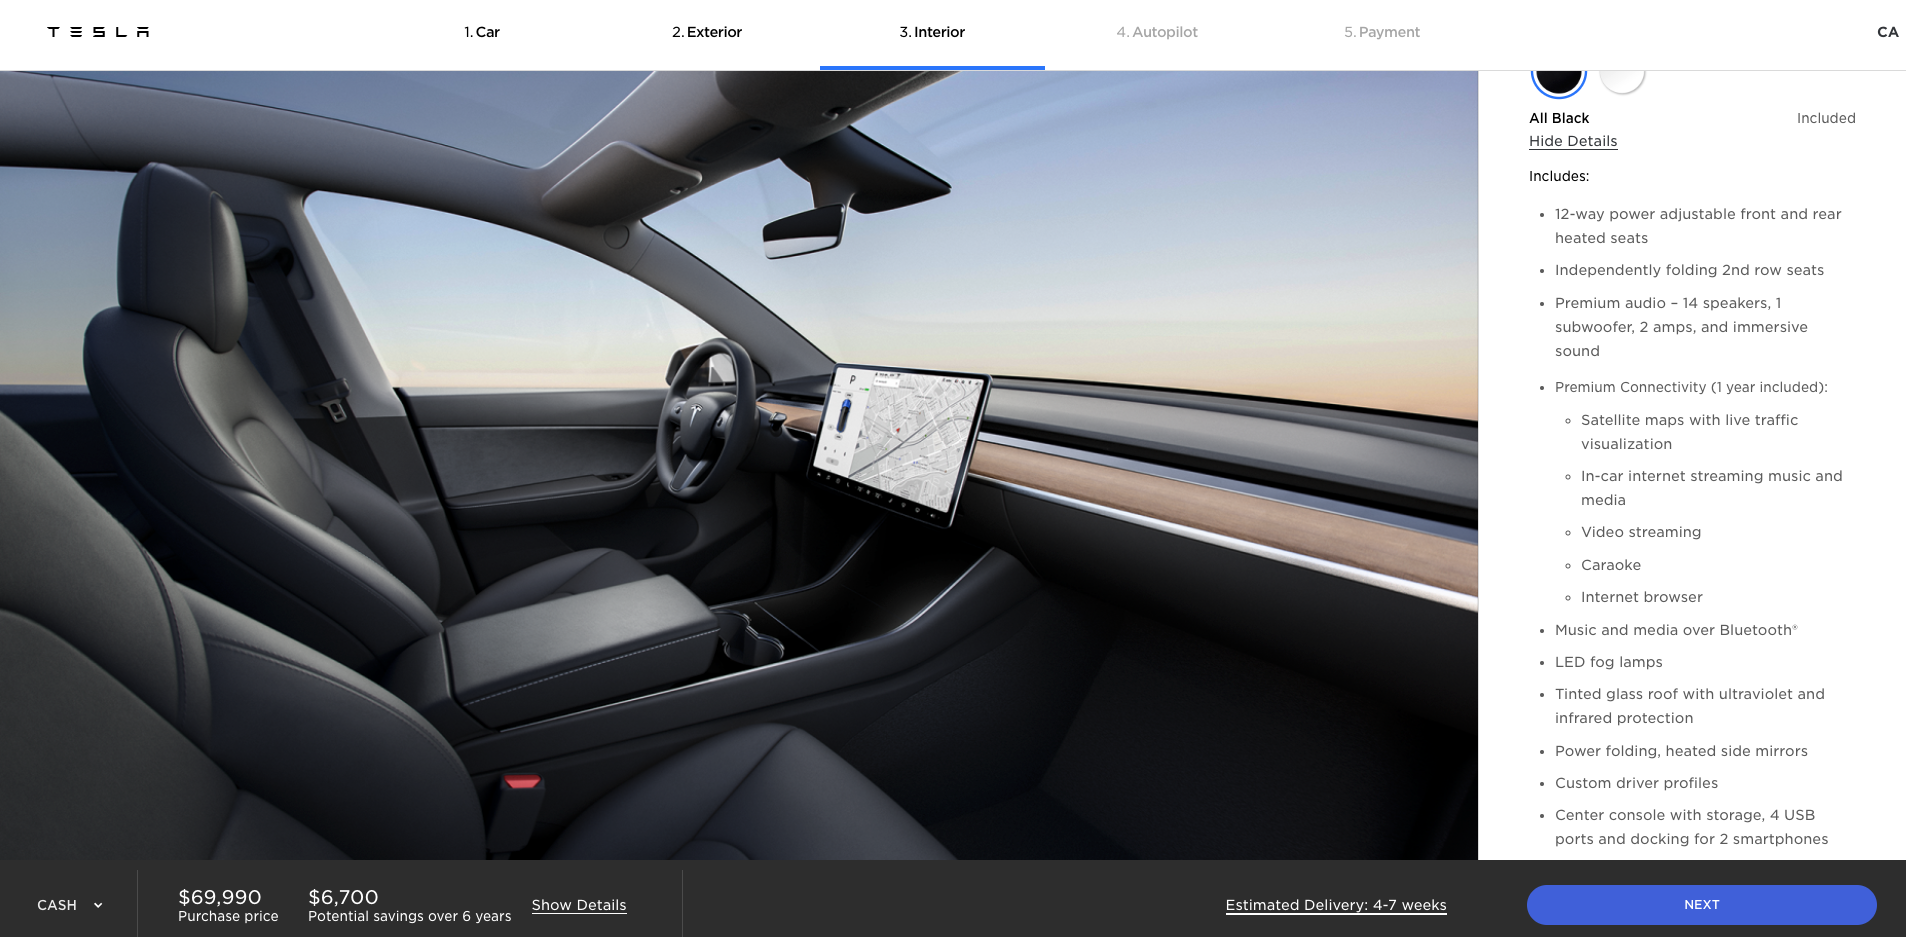 Tesla Model Y gets auto-dimming side mirrors as standard equipment - Drive  Tesla